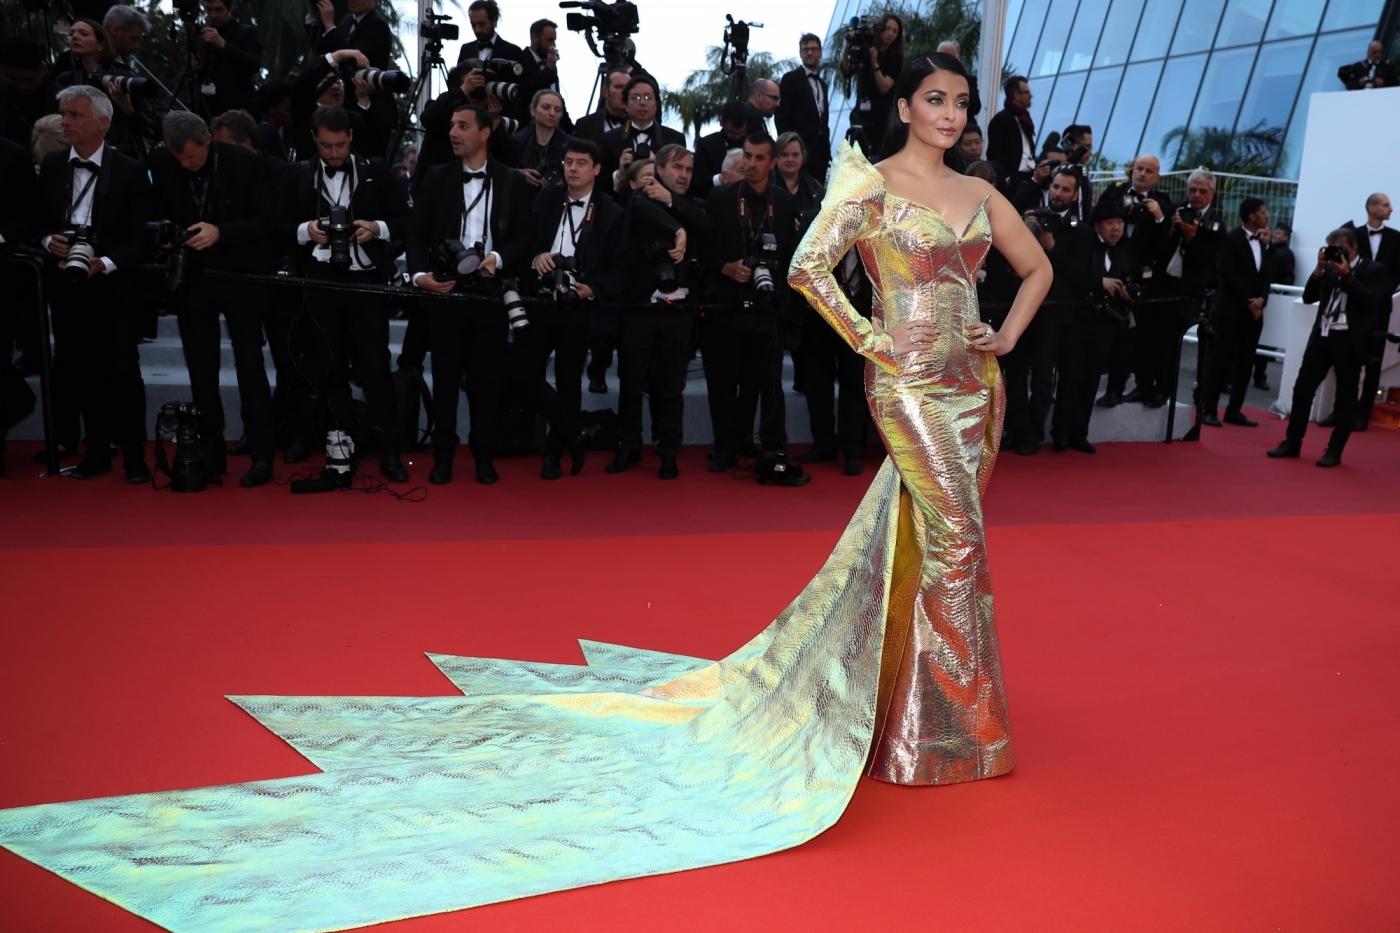 CANNES, May 20, 2019 (Xinhua) -- Actress Aishwarya Rai Bachchan poses for photos upon her arrival at the premiere of the film "A Hidden Life" at the 72nd Cannes Film Festival in Cannes, southern France, on May 19, 2019. The 72nd Cannes Film Festival is held from May 14 to 25. (Xinhua/Zhang Cheng/IANS) by .